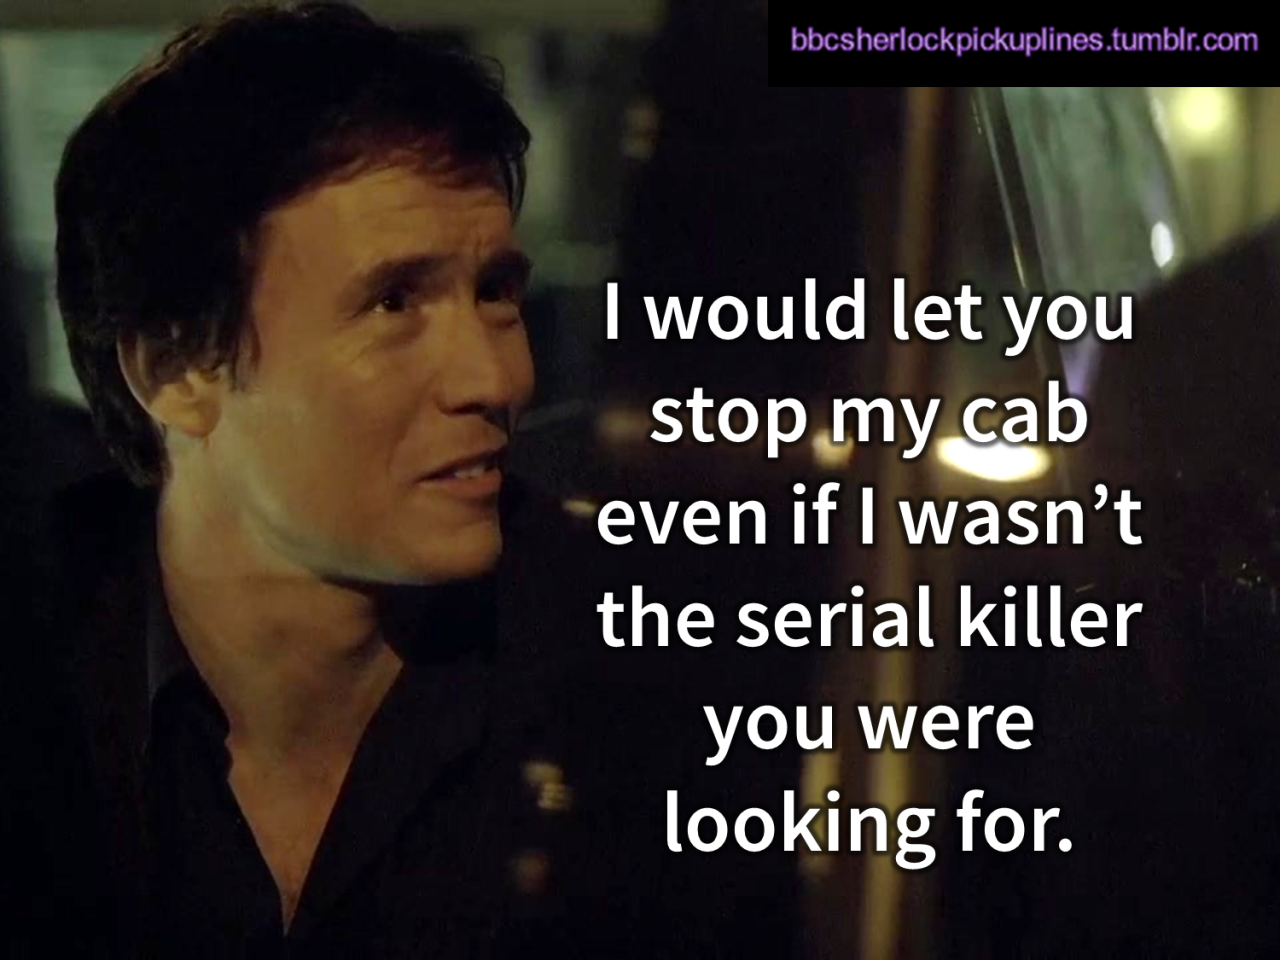 &ldquo;I would let you stop my cab even if I wasn&rsquo;t the serial killer